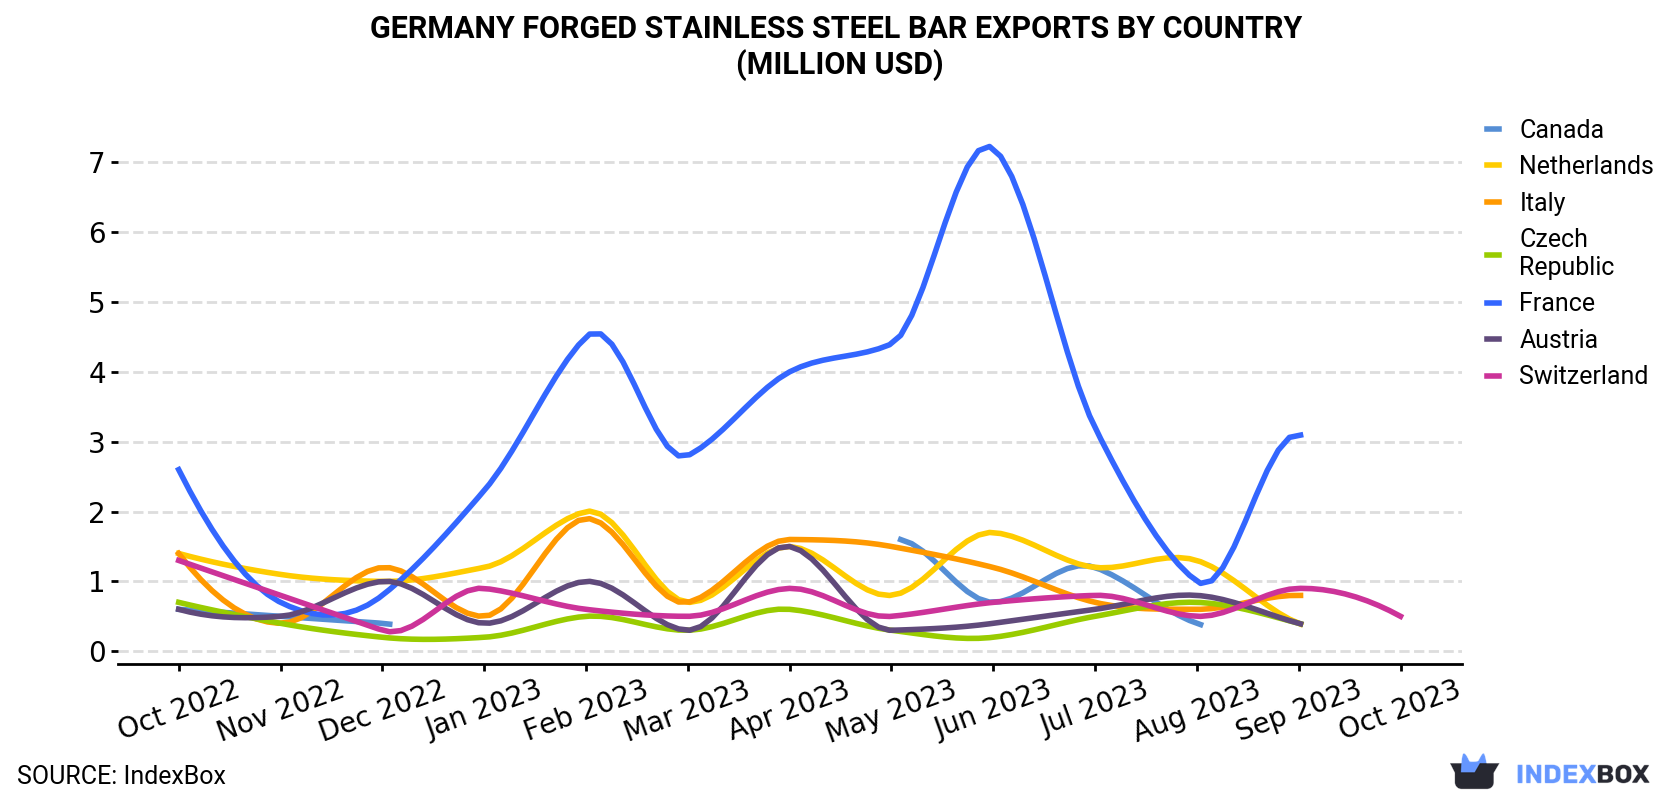 Germany Forged Stainless Steel Bar Exports By Country (Million USD)